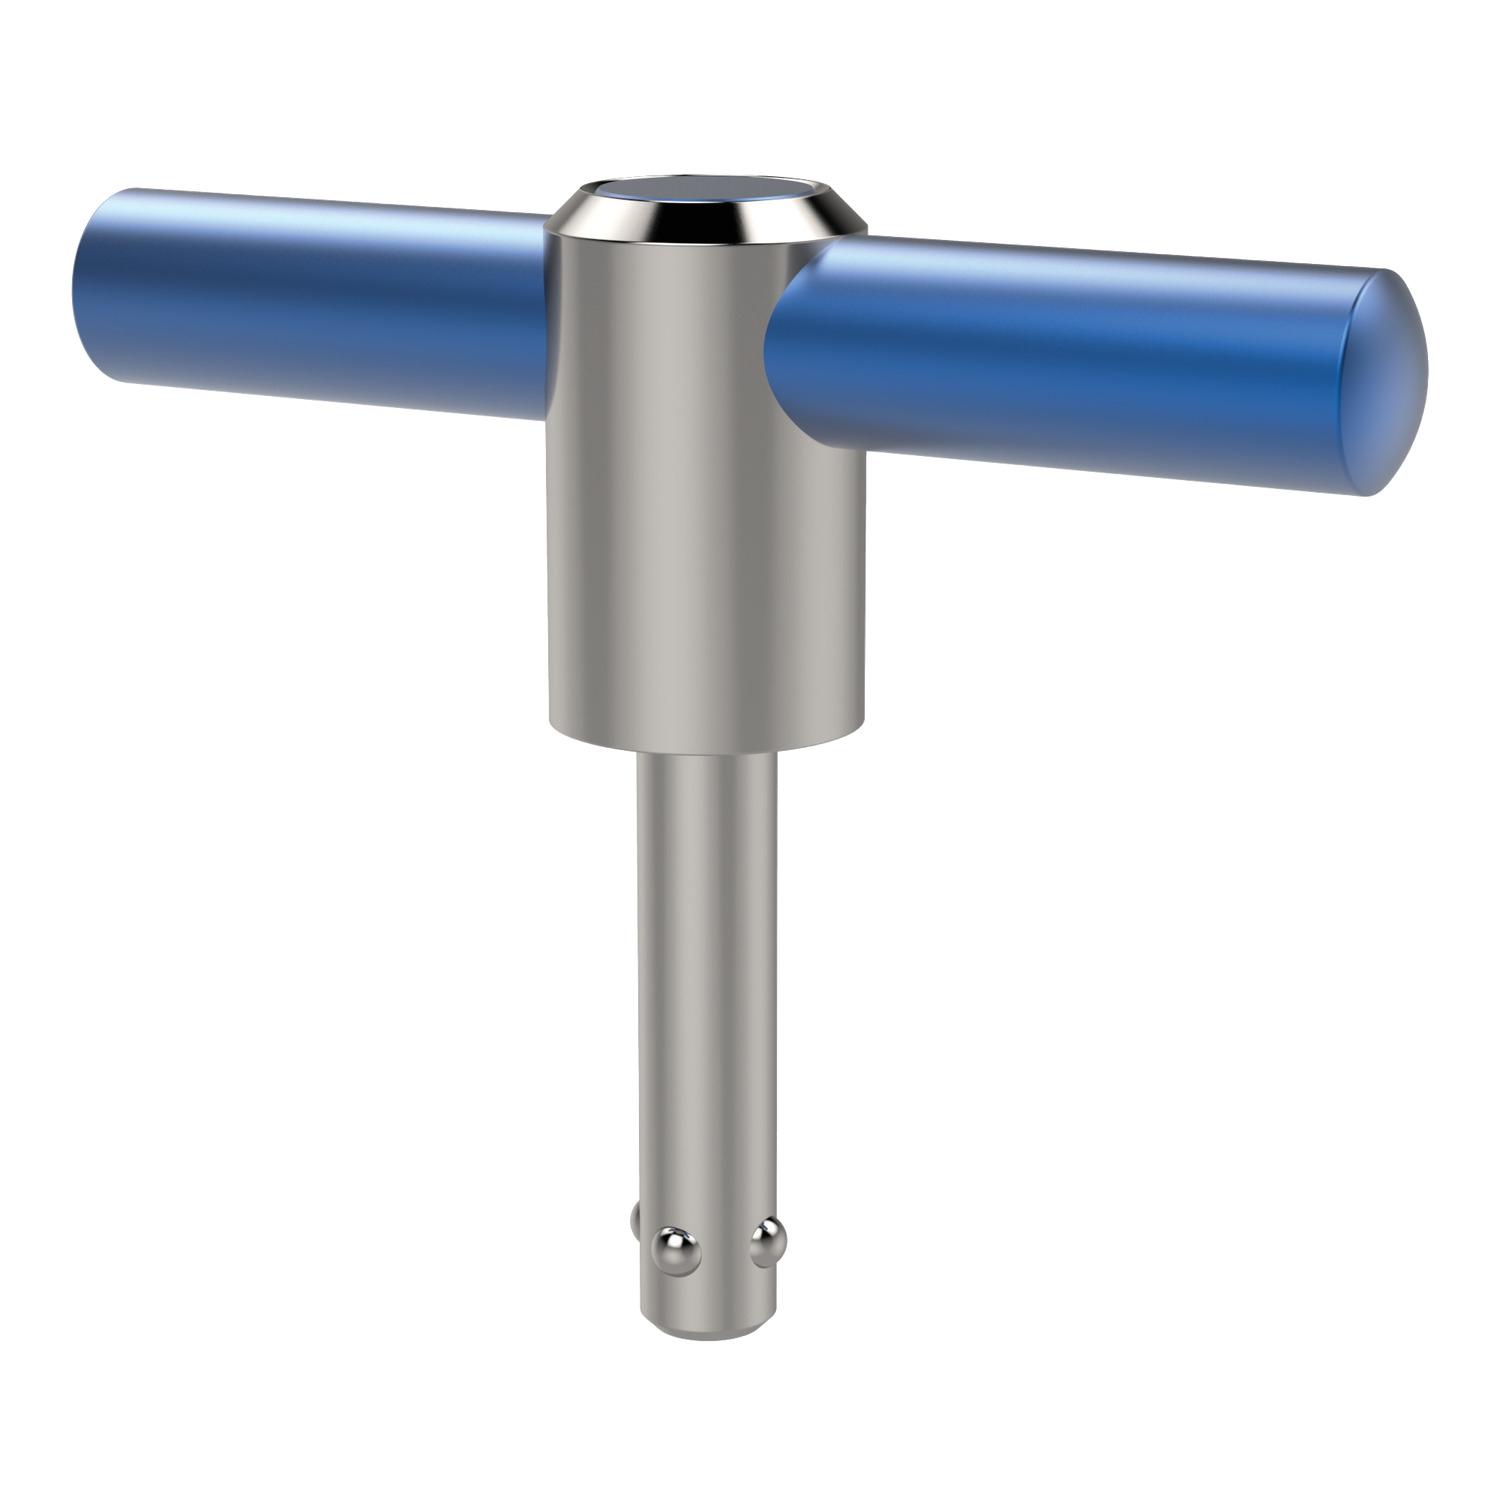 Lifting Pins-Self-Locking Easy to install T-handle self locking pin made from stainless steel with aluminium handle. Corrosion and weathering resistant, suitable for outdoor application.